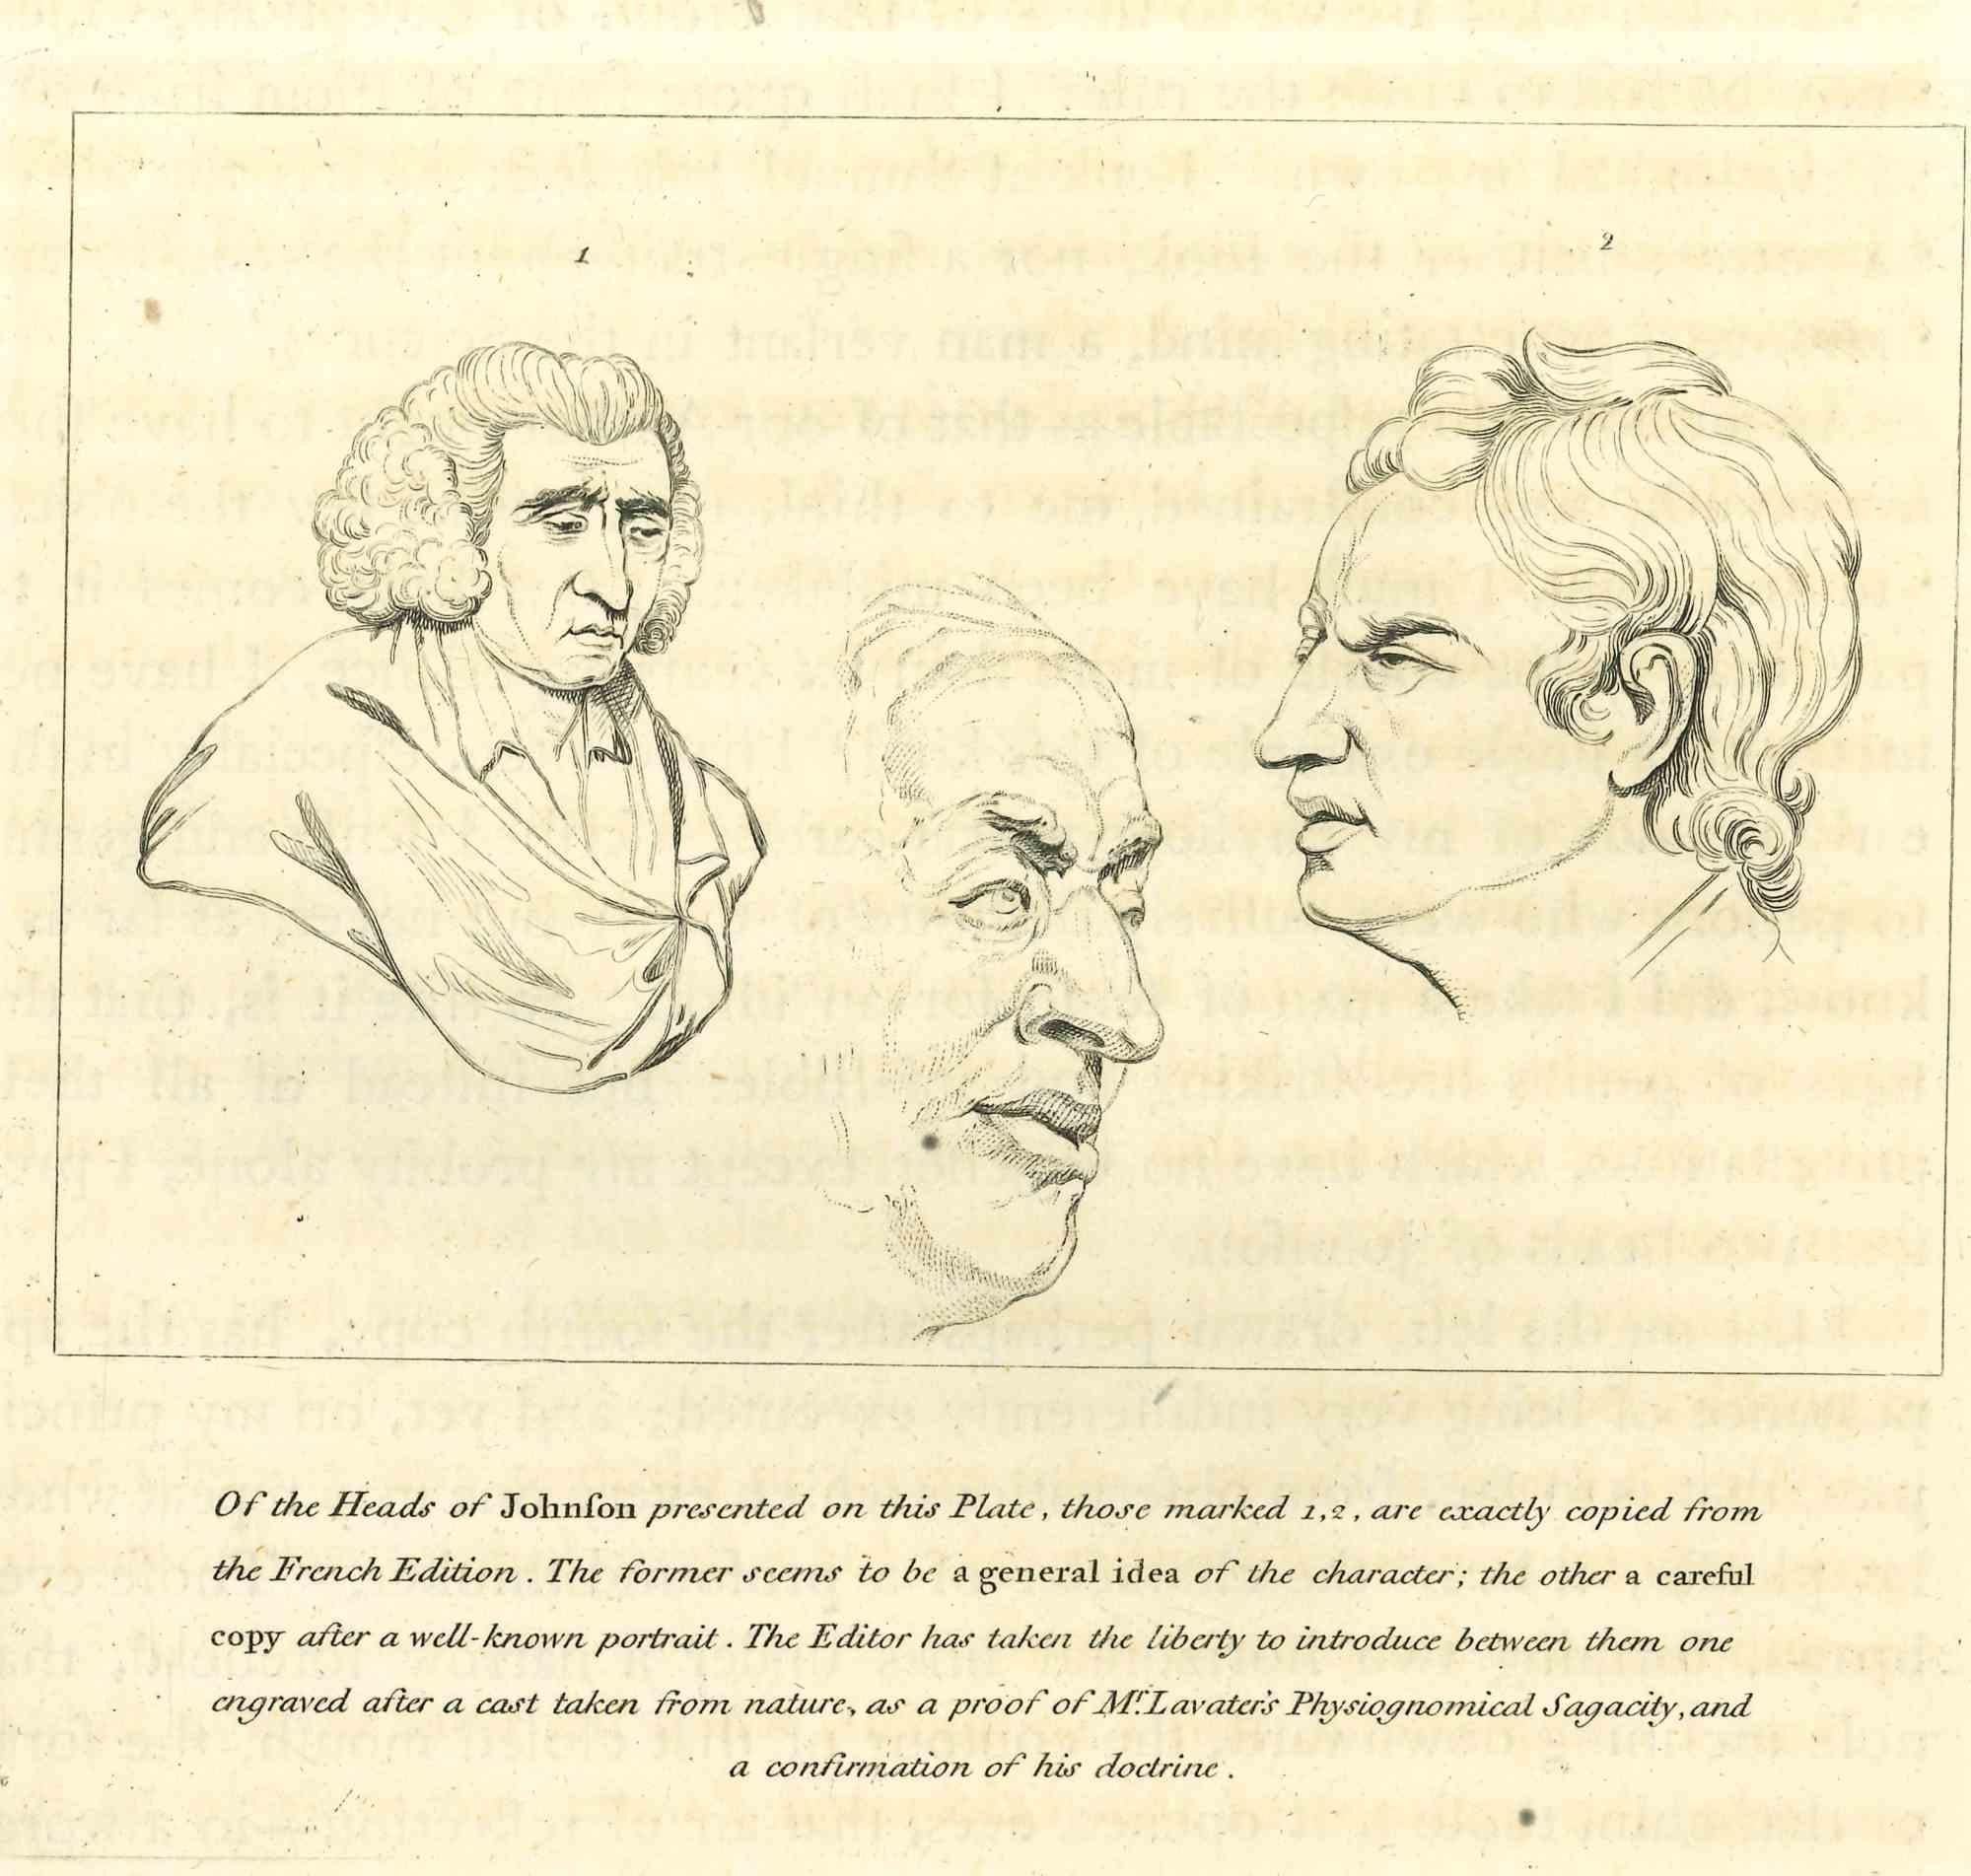 Heads of Johnfon is an original artwork realized by Thomas Holloway for Johann Caspar Lavater's "Essays on Physiognomy, Designed to promote the Knowledge and the Love of Mankind", London, Bensley, 1810.

Description of this artwork presented on the